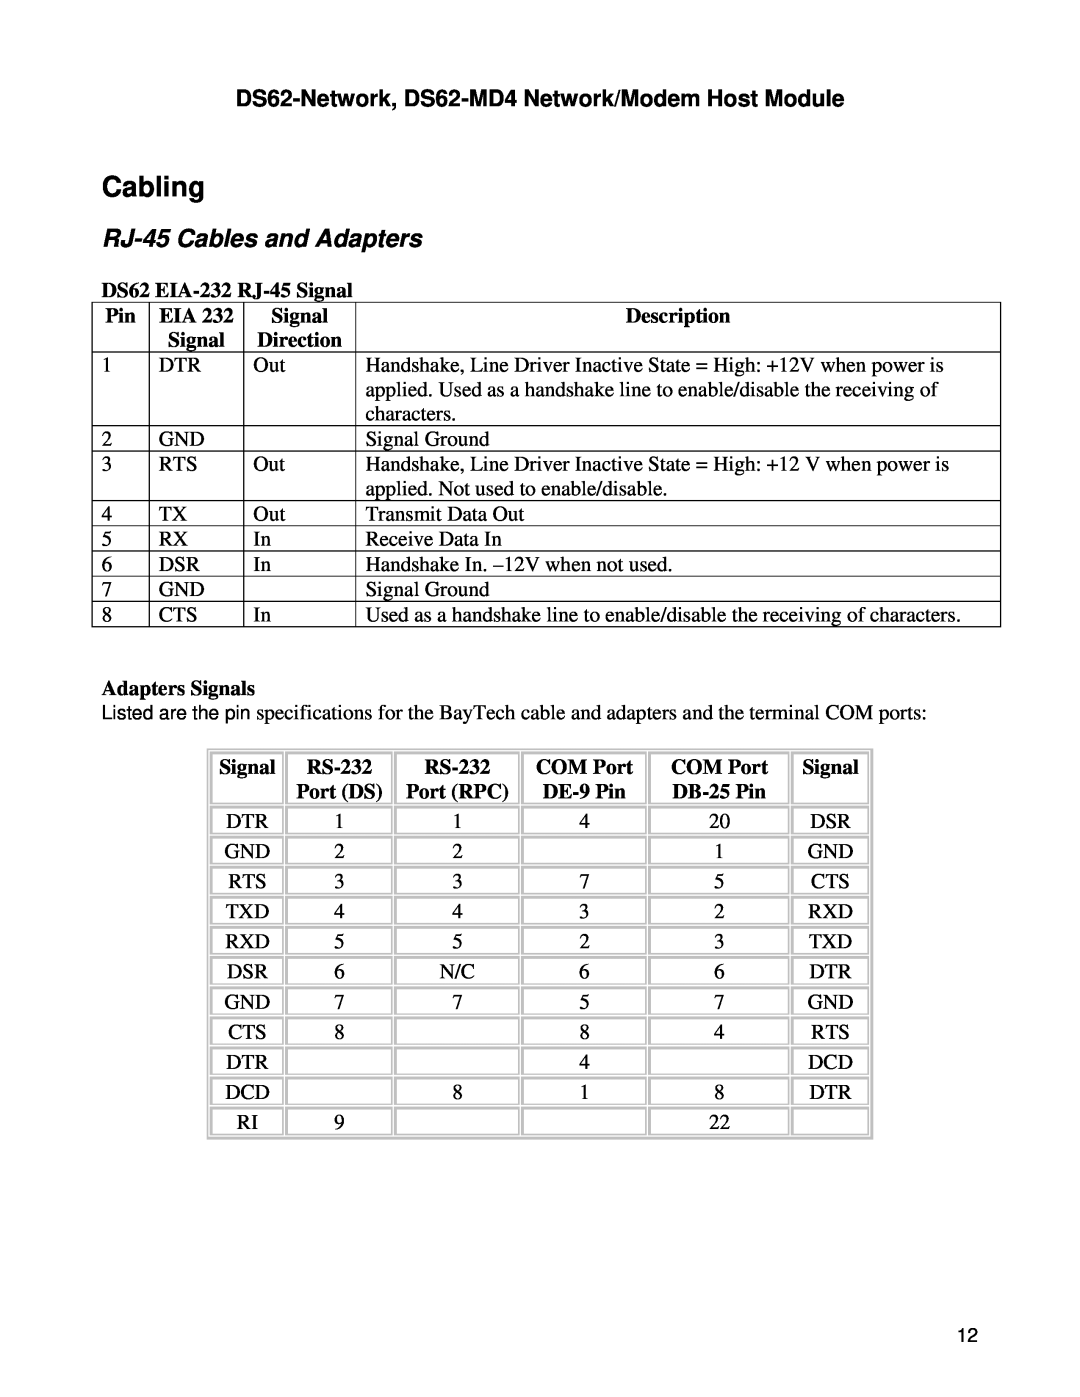 Bay Technical Associates manual Cabling, RJ-45 Cables and Adapters, DS62-Network, DS62-MD4 Network/Modem Host Module 